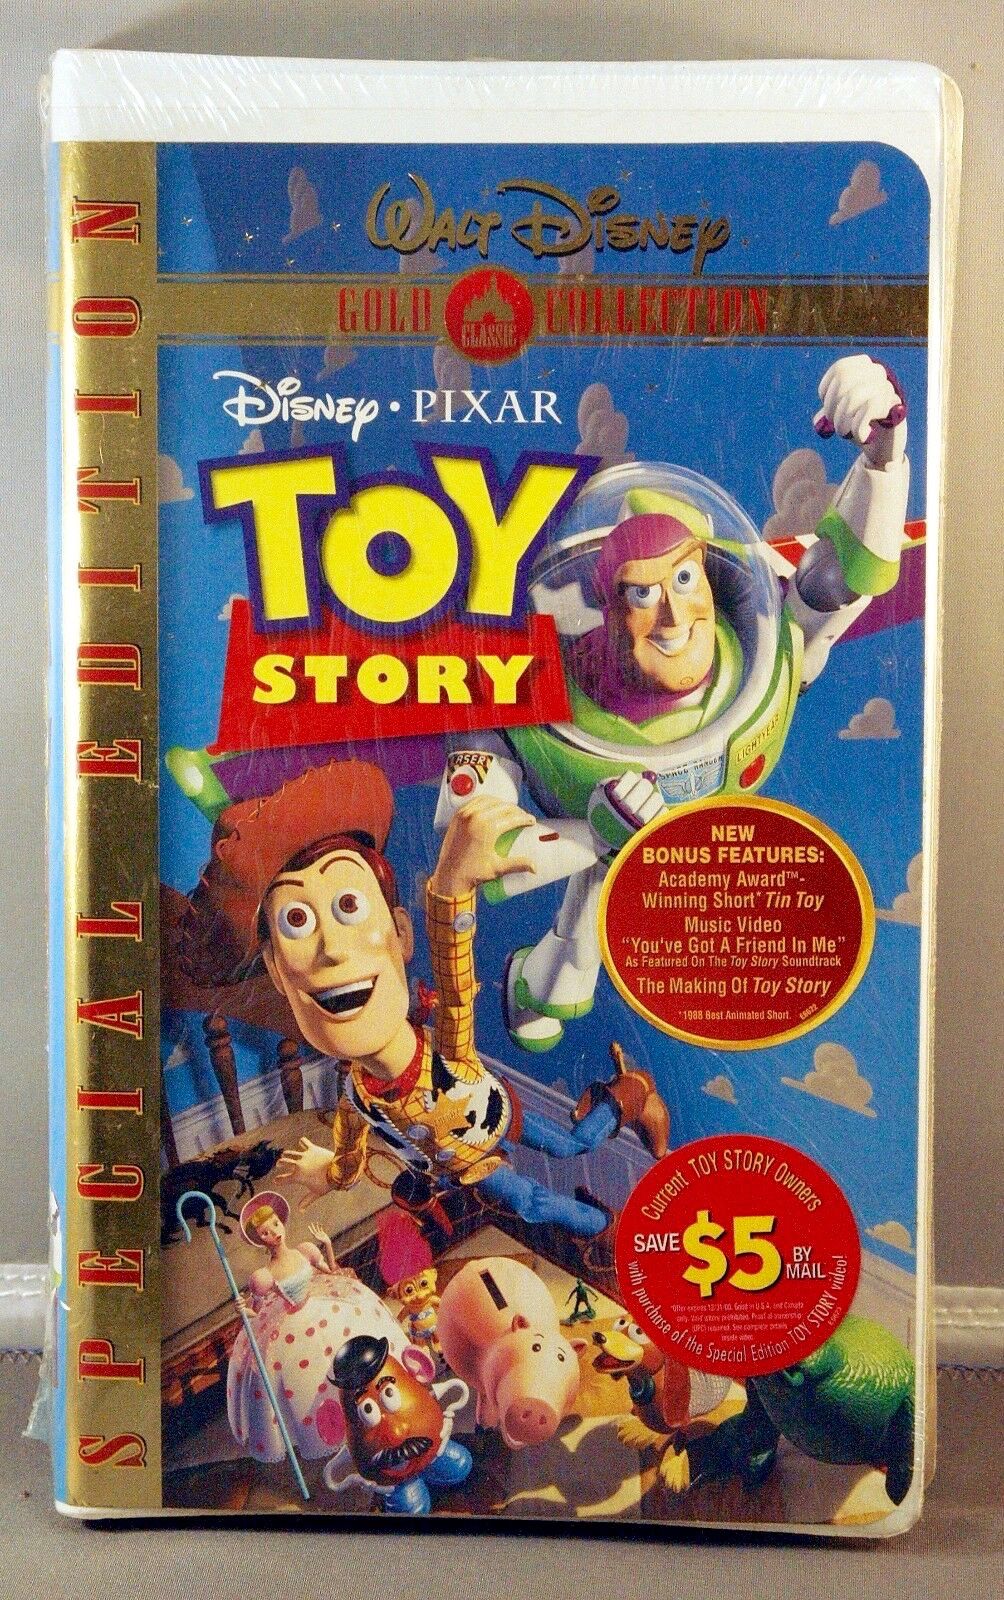 DISNEY PIXAR Toy Story VHS Tape, GOLD COLLECTION Video Special Edition *NEW SEALED*